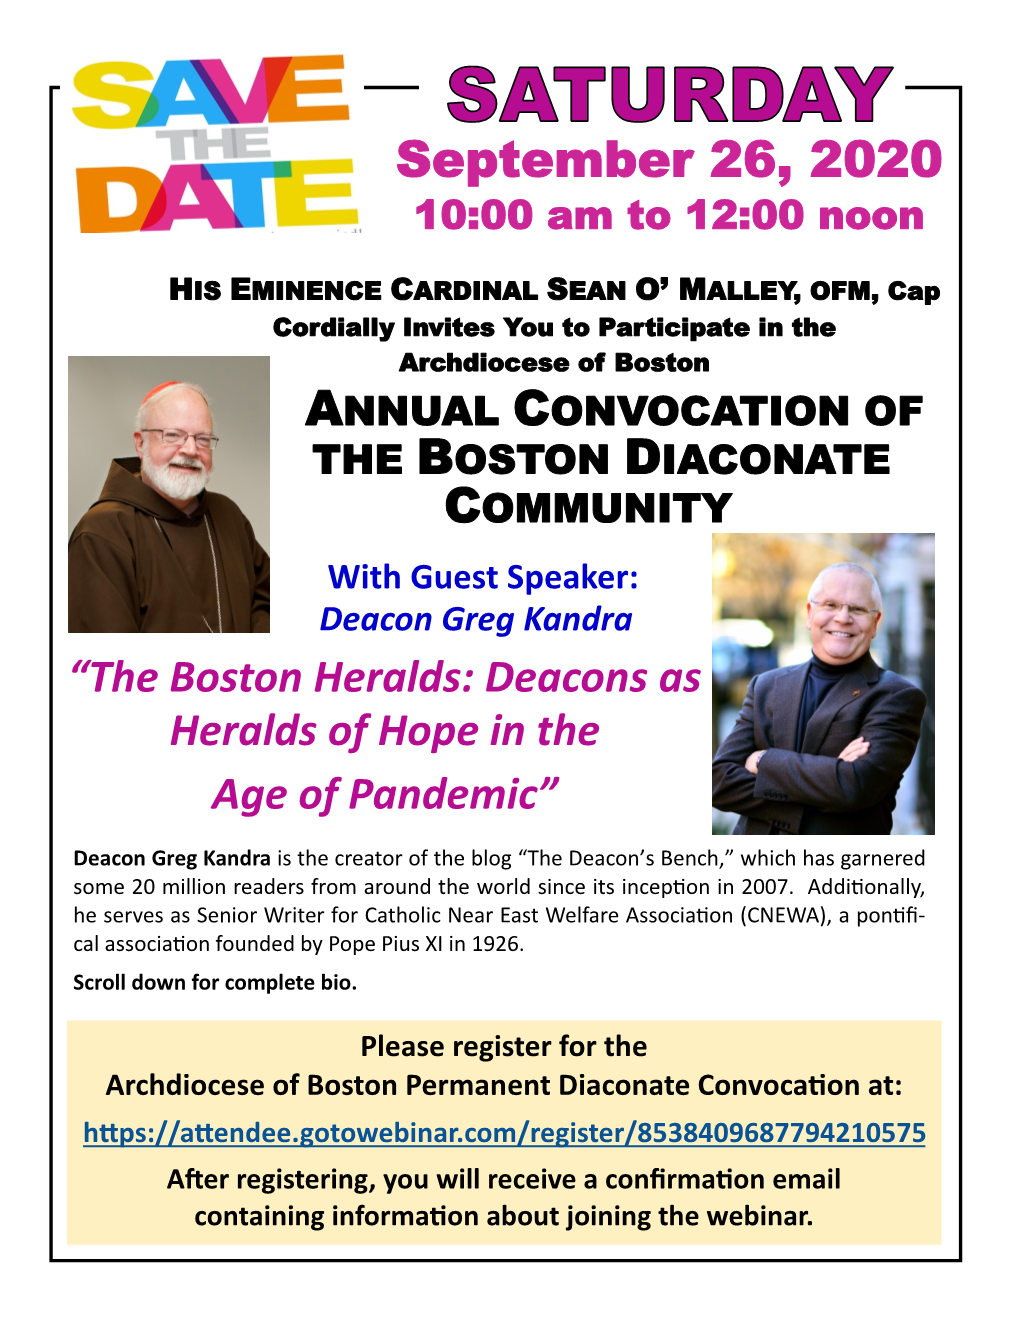 Deacon Greg Kandra “The Boston Heralds: Deacons As Heralds of Hope in the Age of Pandemic”